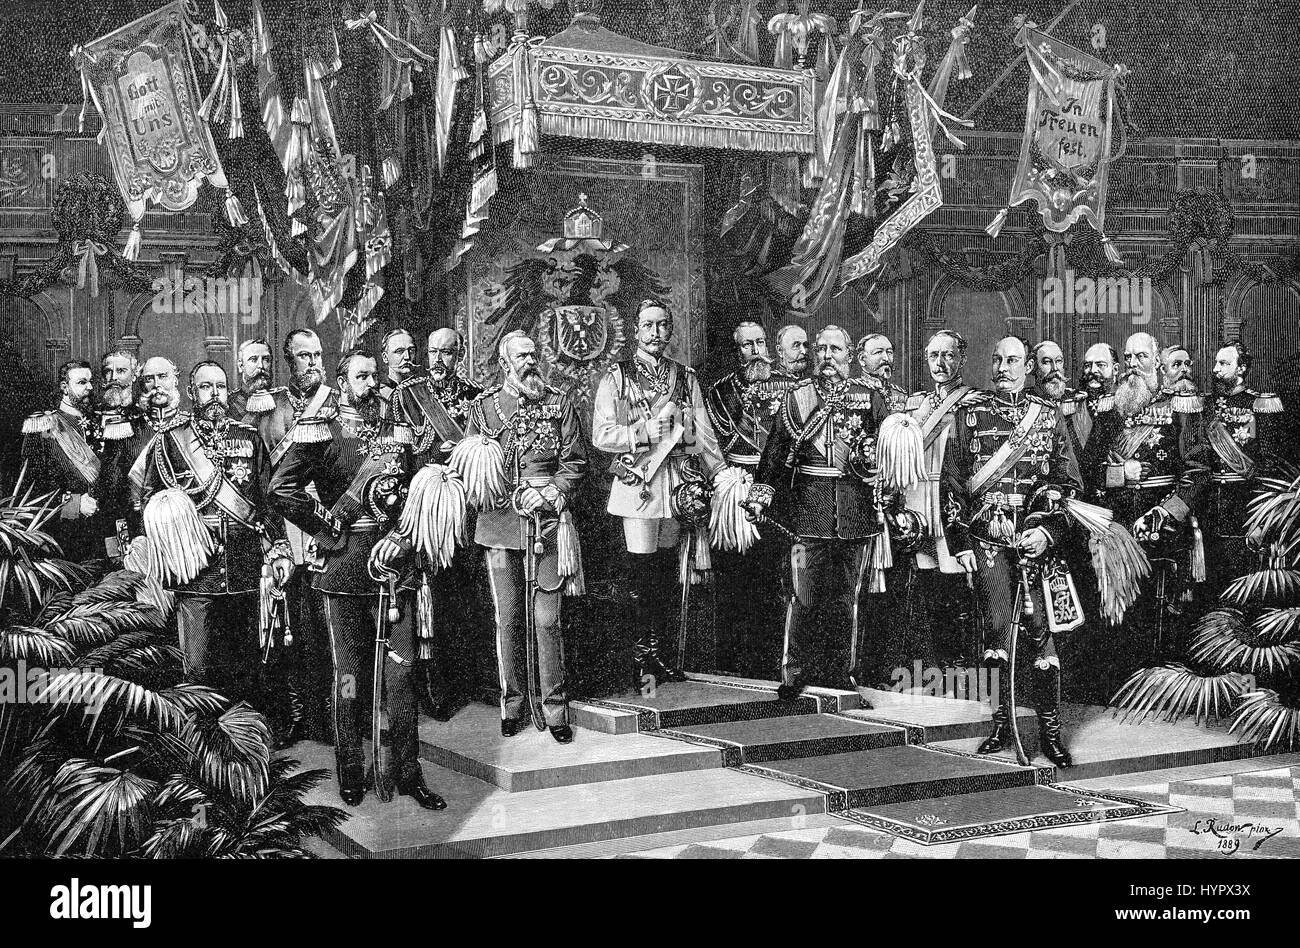 The reigning princes of Germany, 1889 Stock Photo